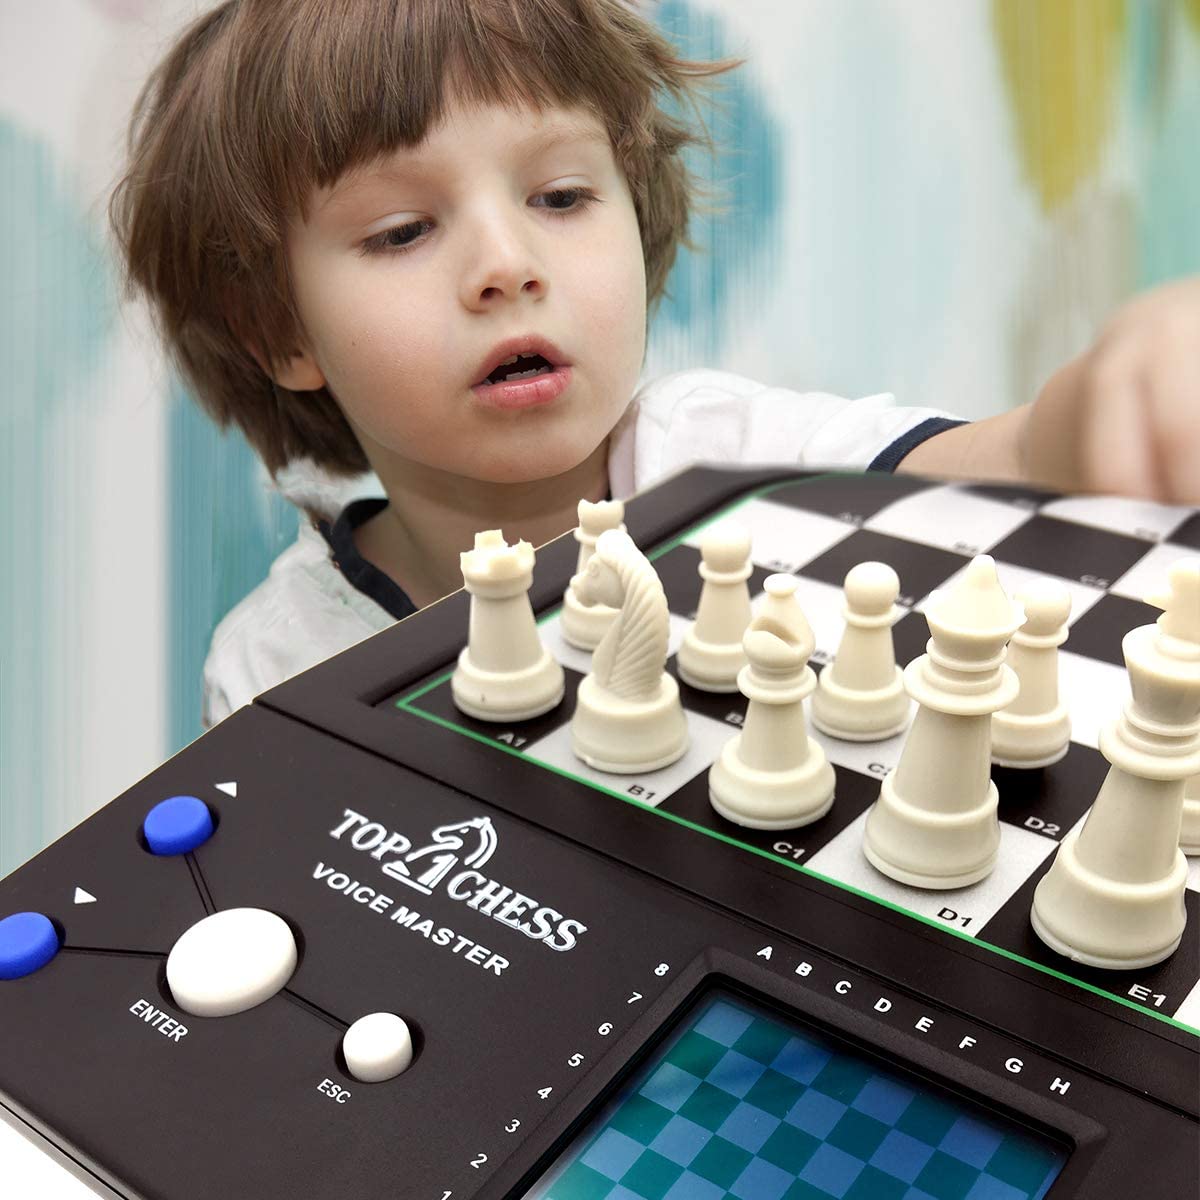 Top 1 Chess Electronic Chess Set | Chess Sets for Adults | Chess Set for Kids | Voice Chess Computer Teaching System | Chess Strategy Beginners Improving | Large Screen Learning Chess Set Board Game - image 2 of 7